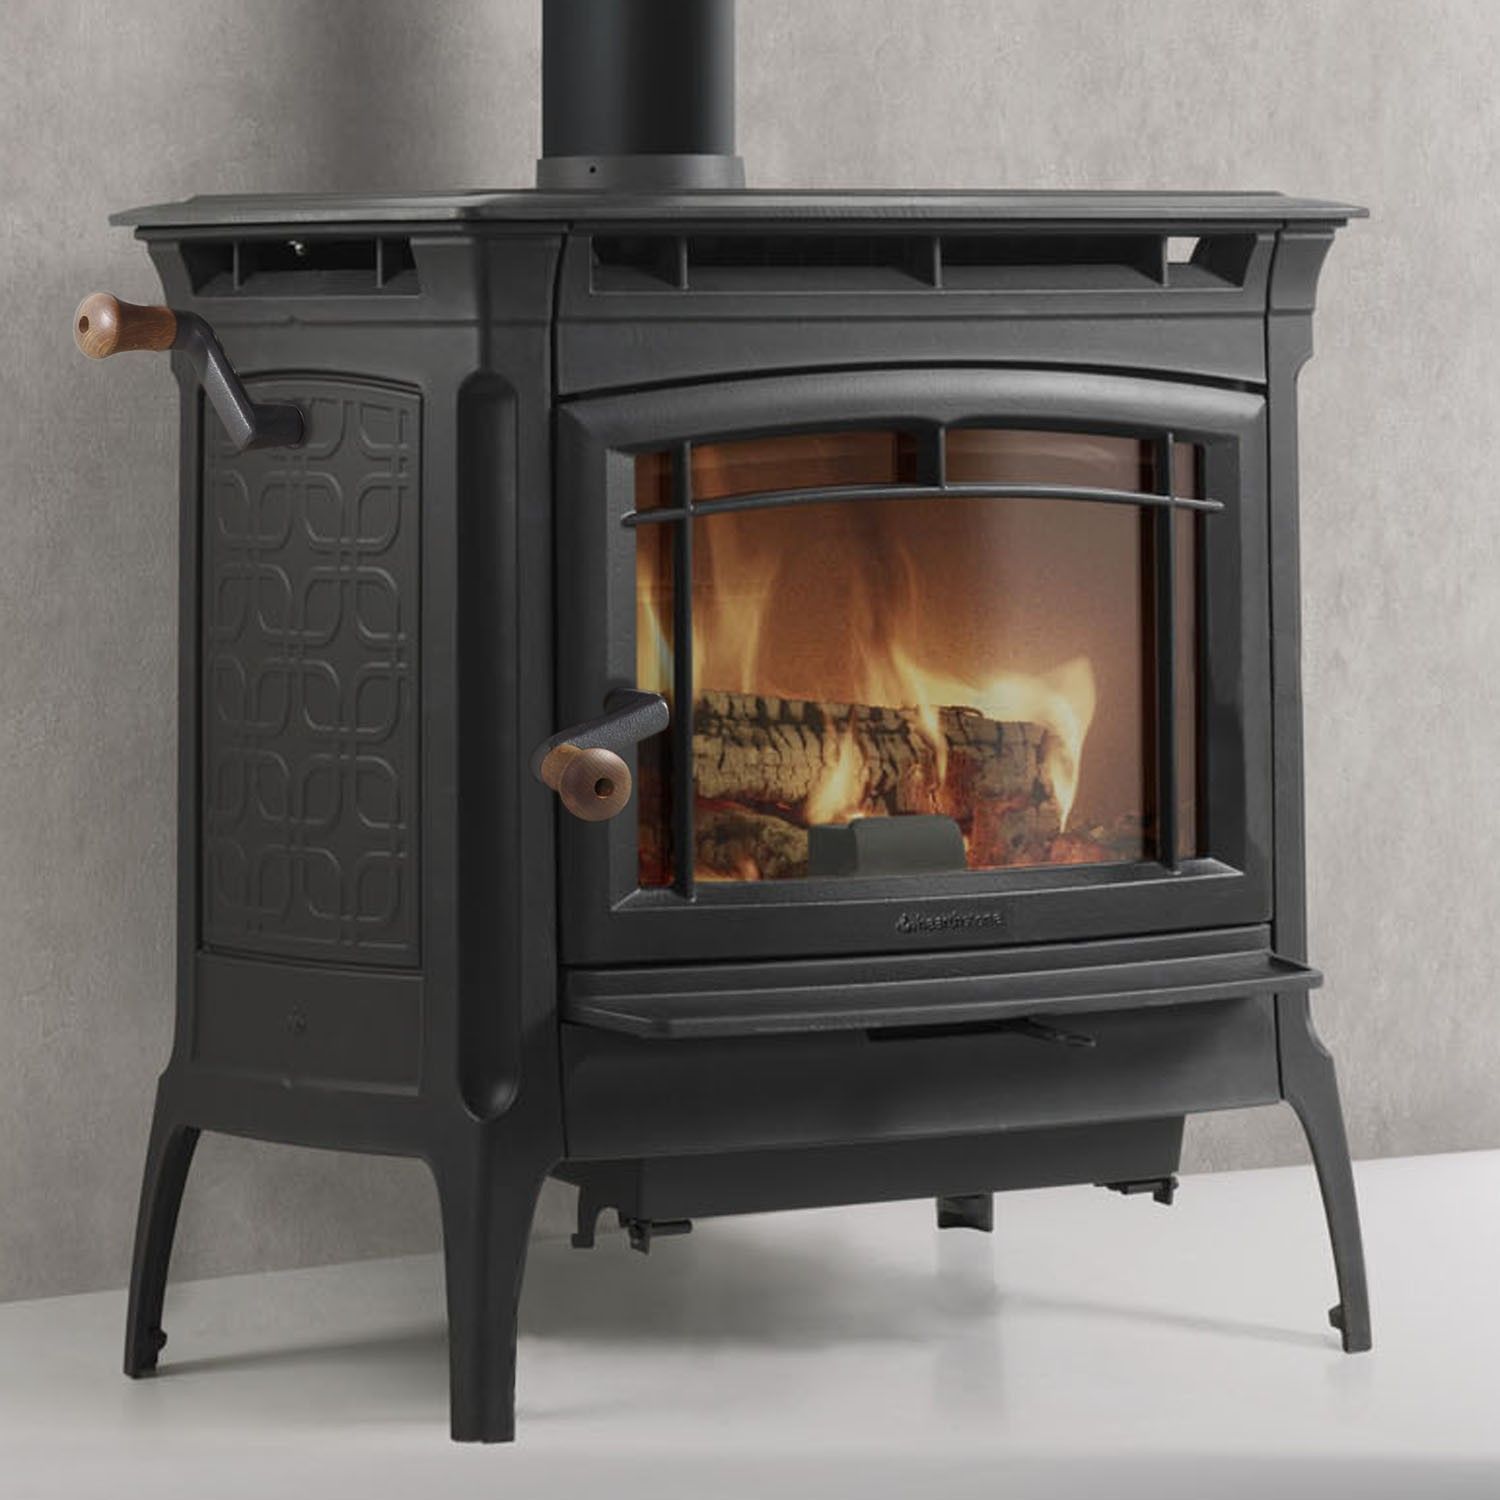 Fireplace Manufacturers Fresh Pin by Do Wrocklage Harp On Home